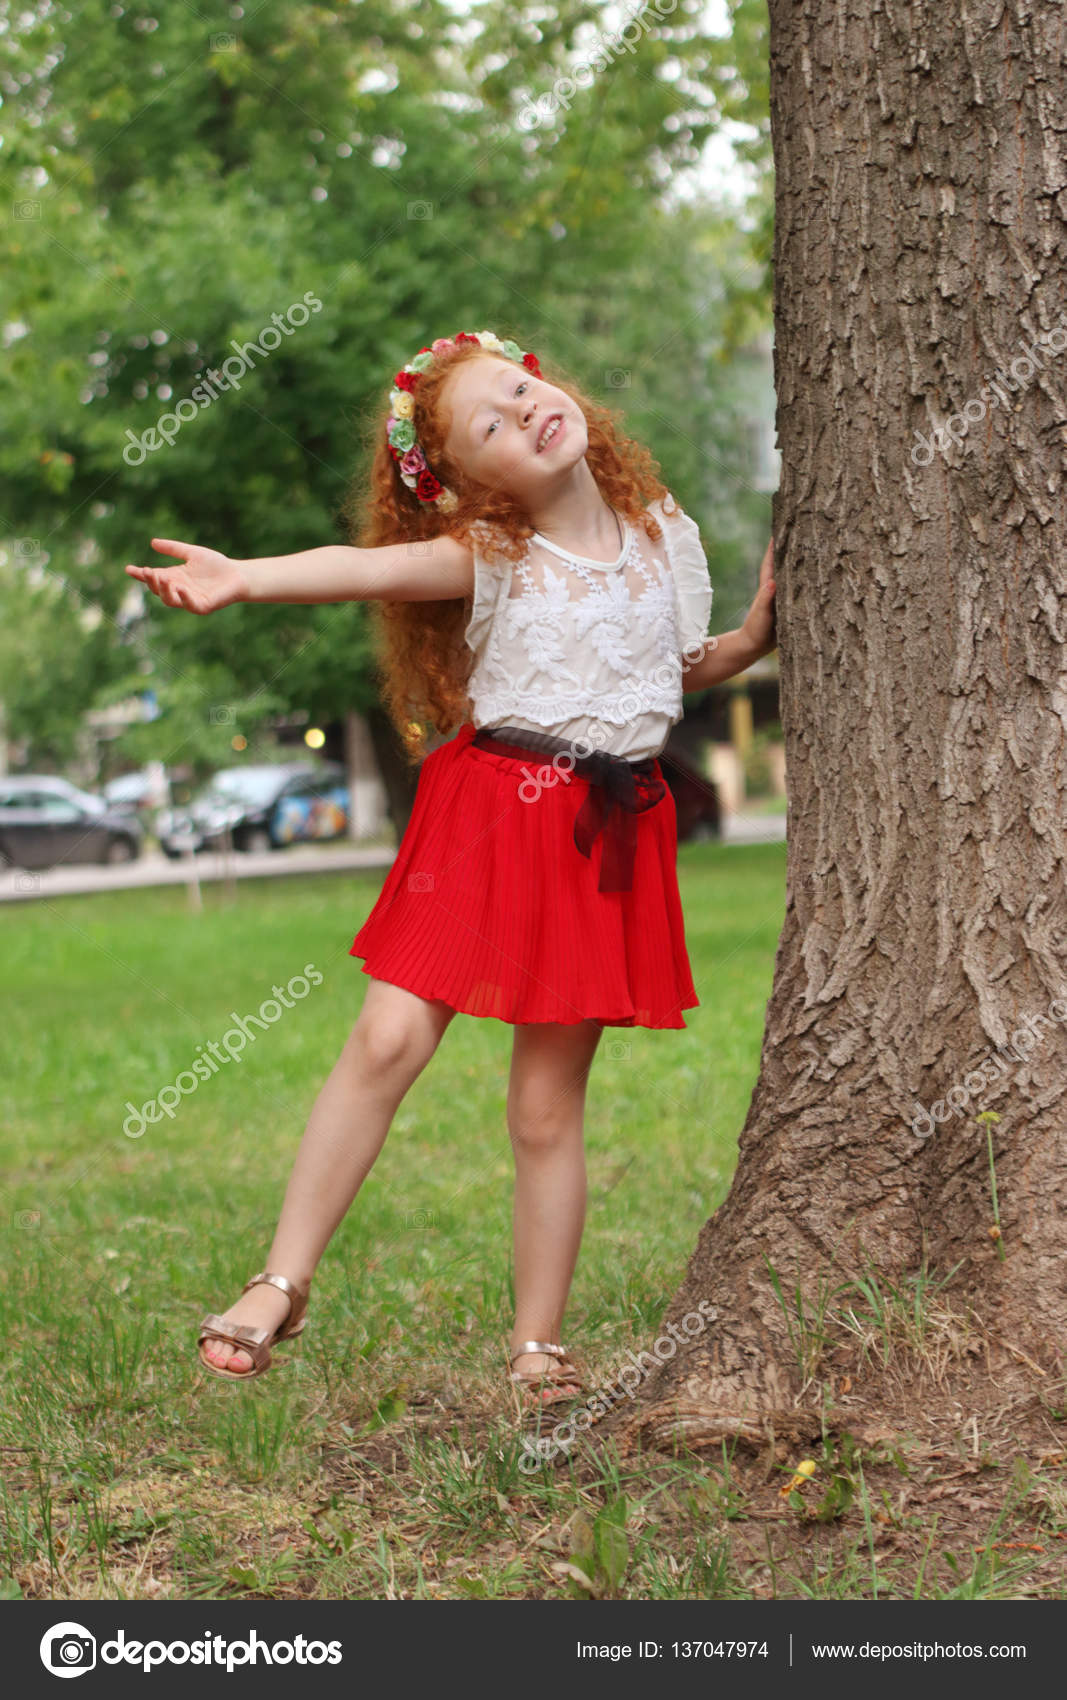 A cute young girl posing - Free Stock Photo by Benjamin Miller on  Stockvault.net